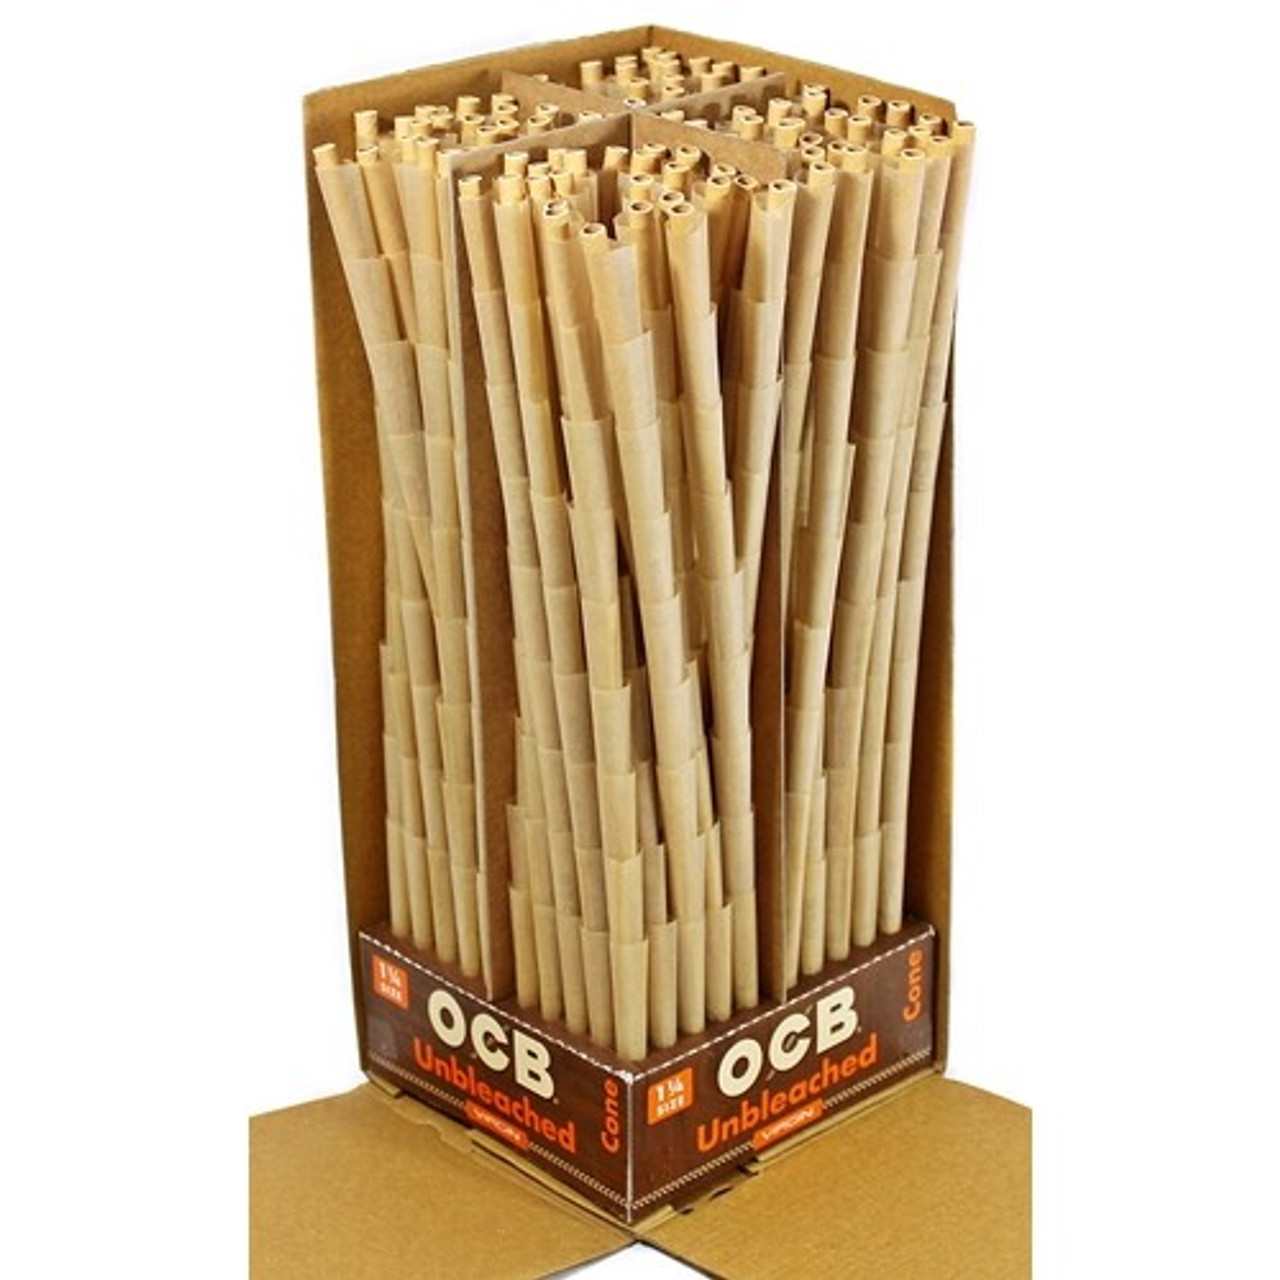 OCB Virgin Unbleached Pre-Rolled Cones 1 1/4 Size 900 ct.